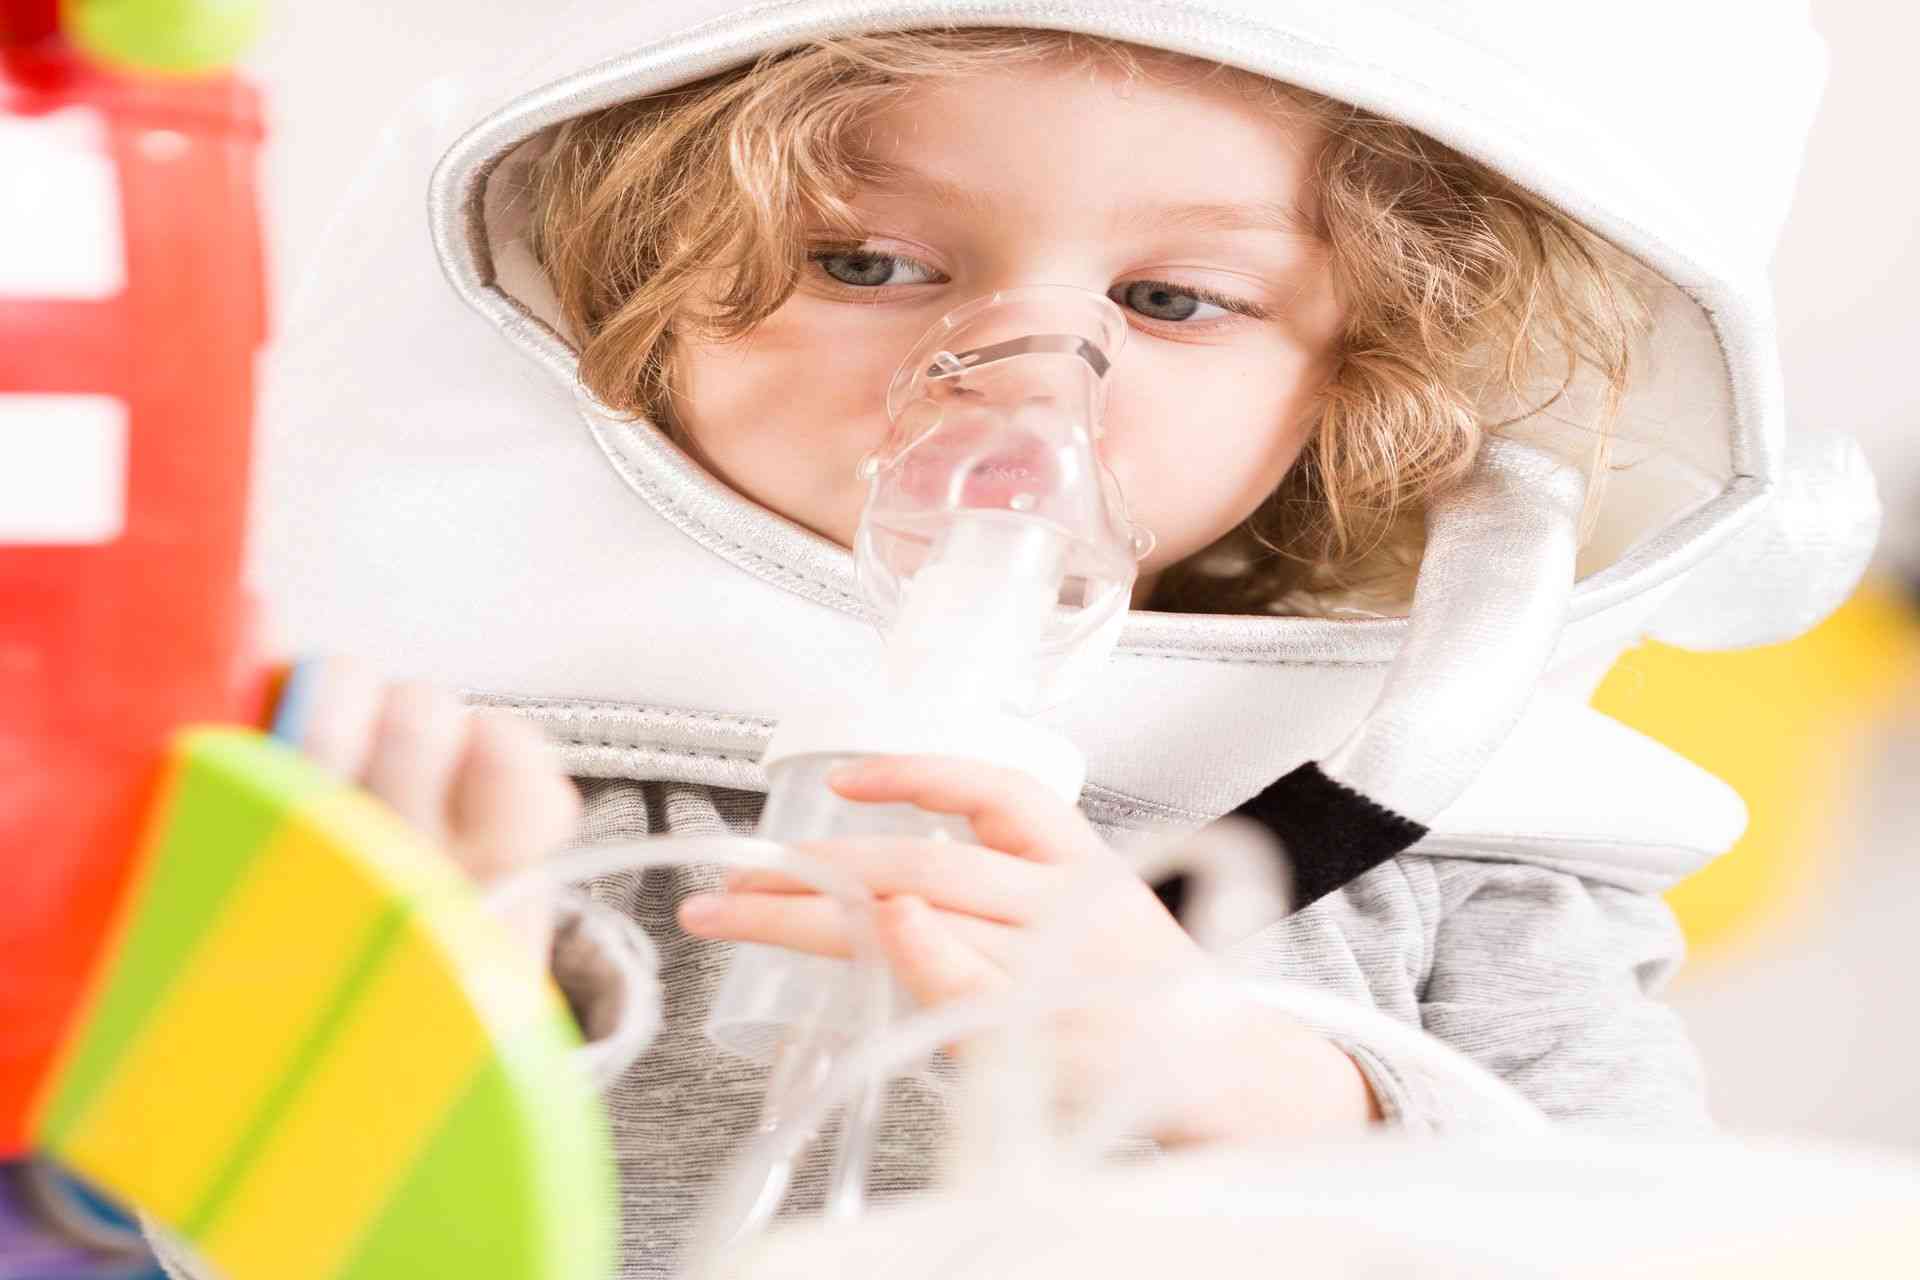 Features to Consider when Purchasing a Nebulizer